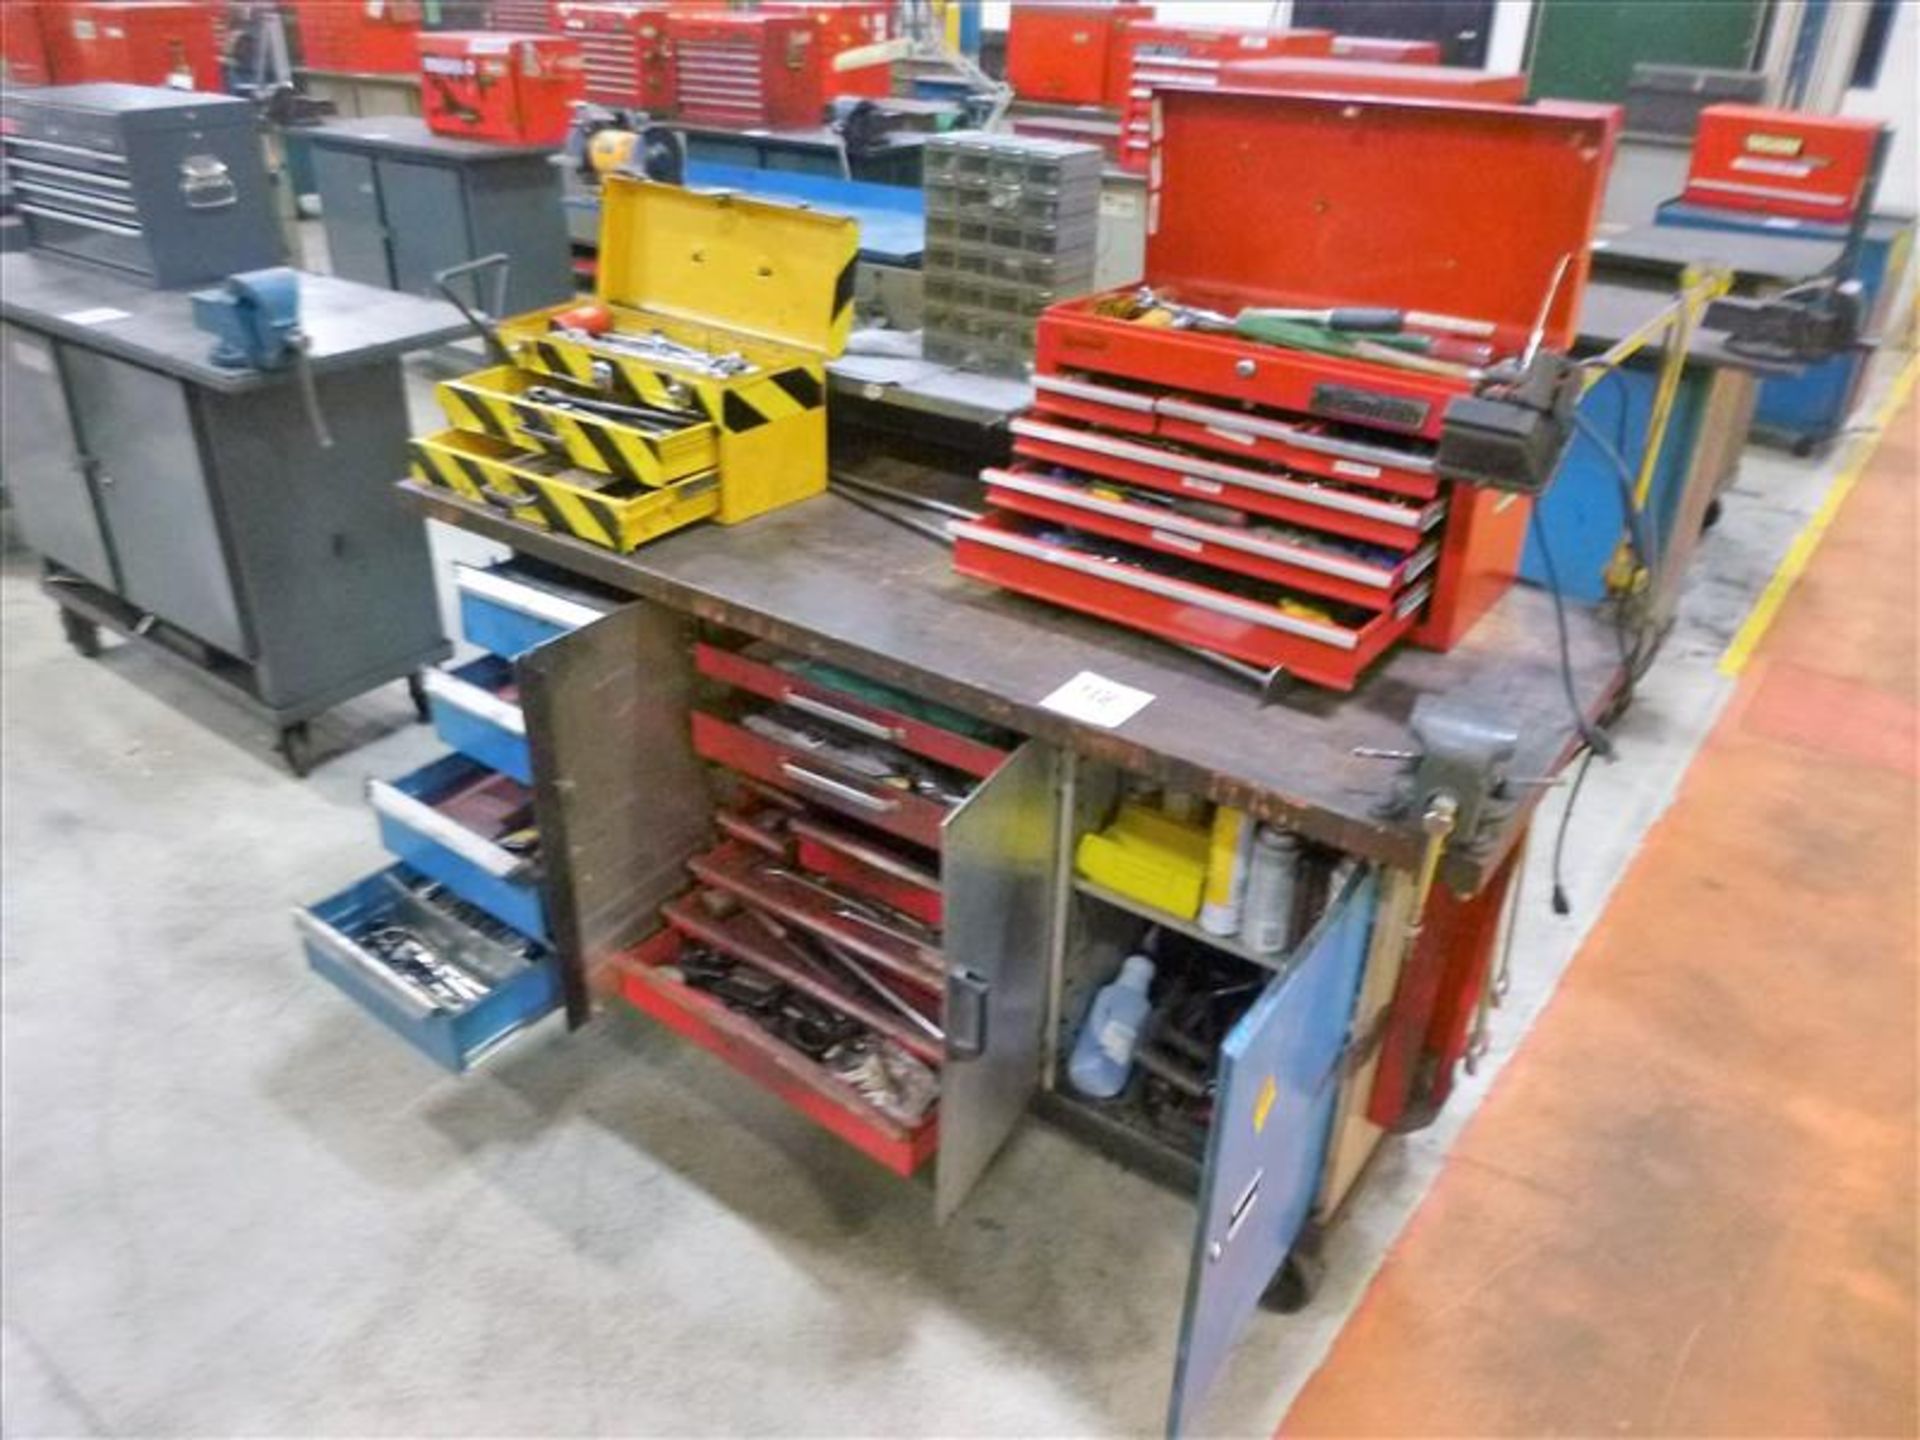 Rolling Work Bench, approx. 30" x 72" c/w 4" Bench Vice & Contents (Hand Tools, Spare Parts, - Image 4 of 4